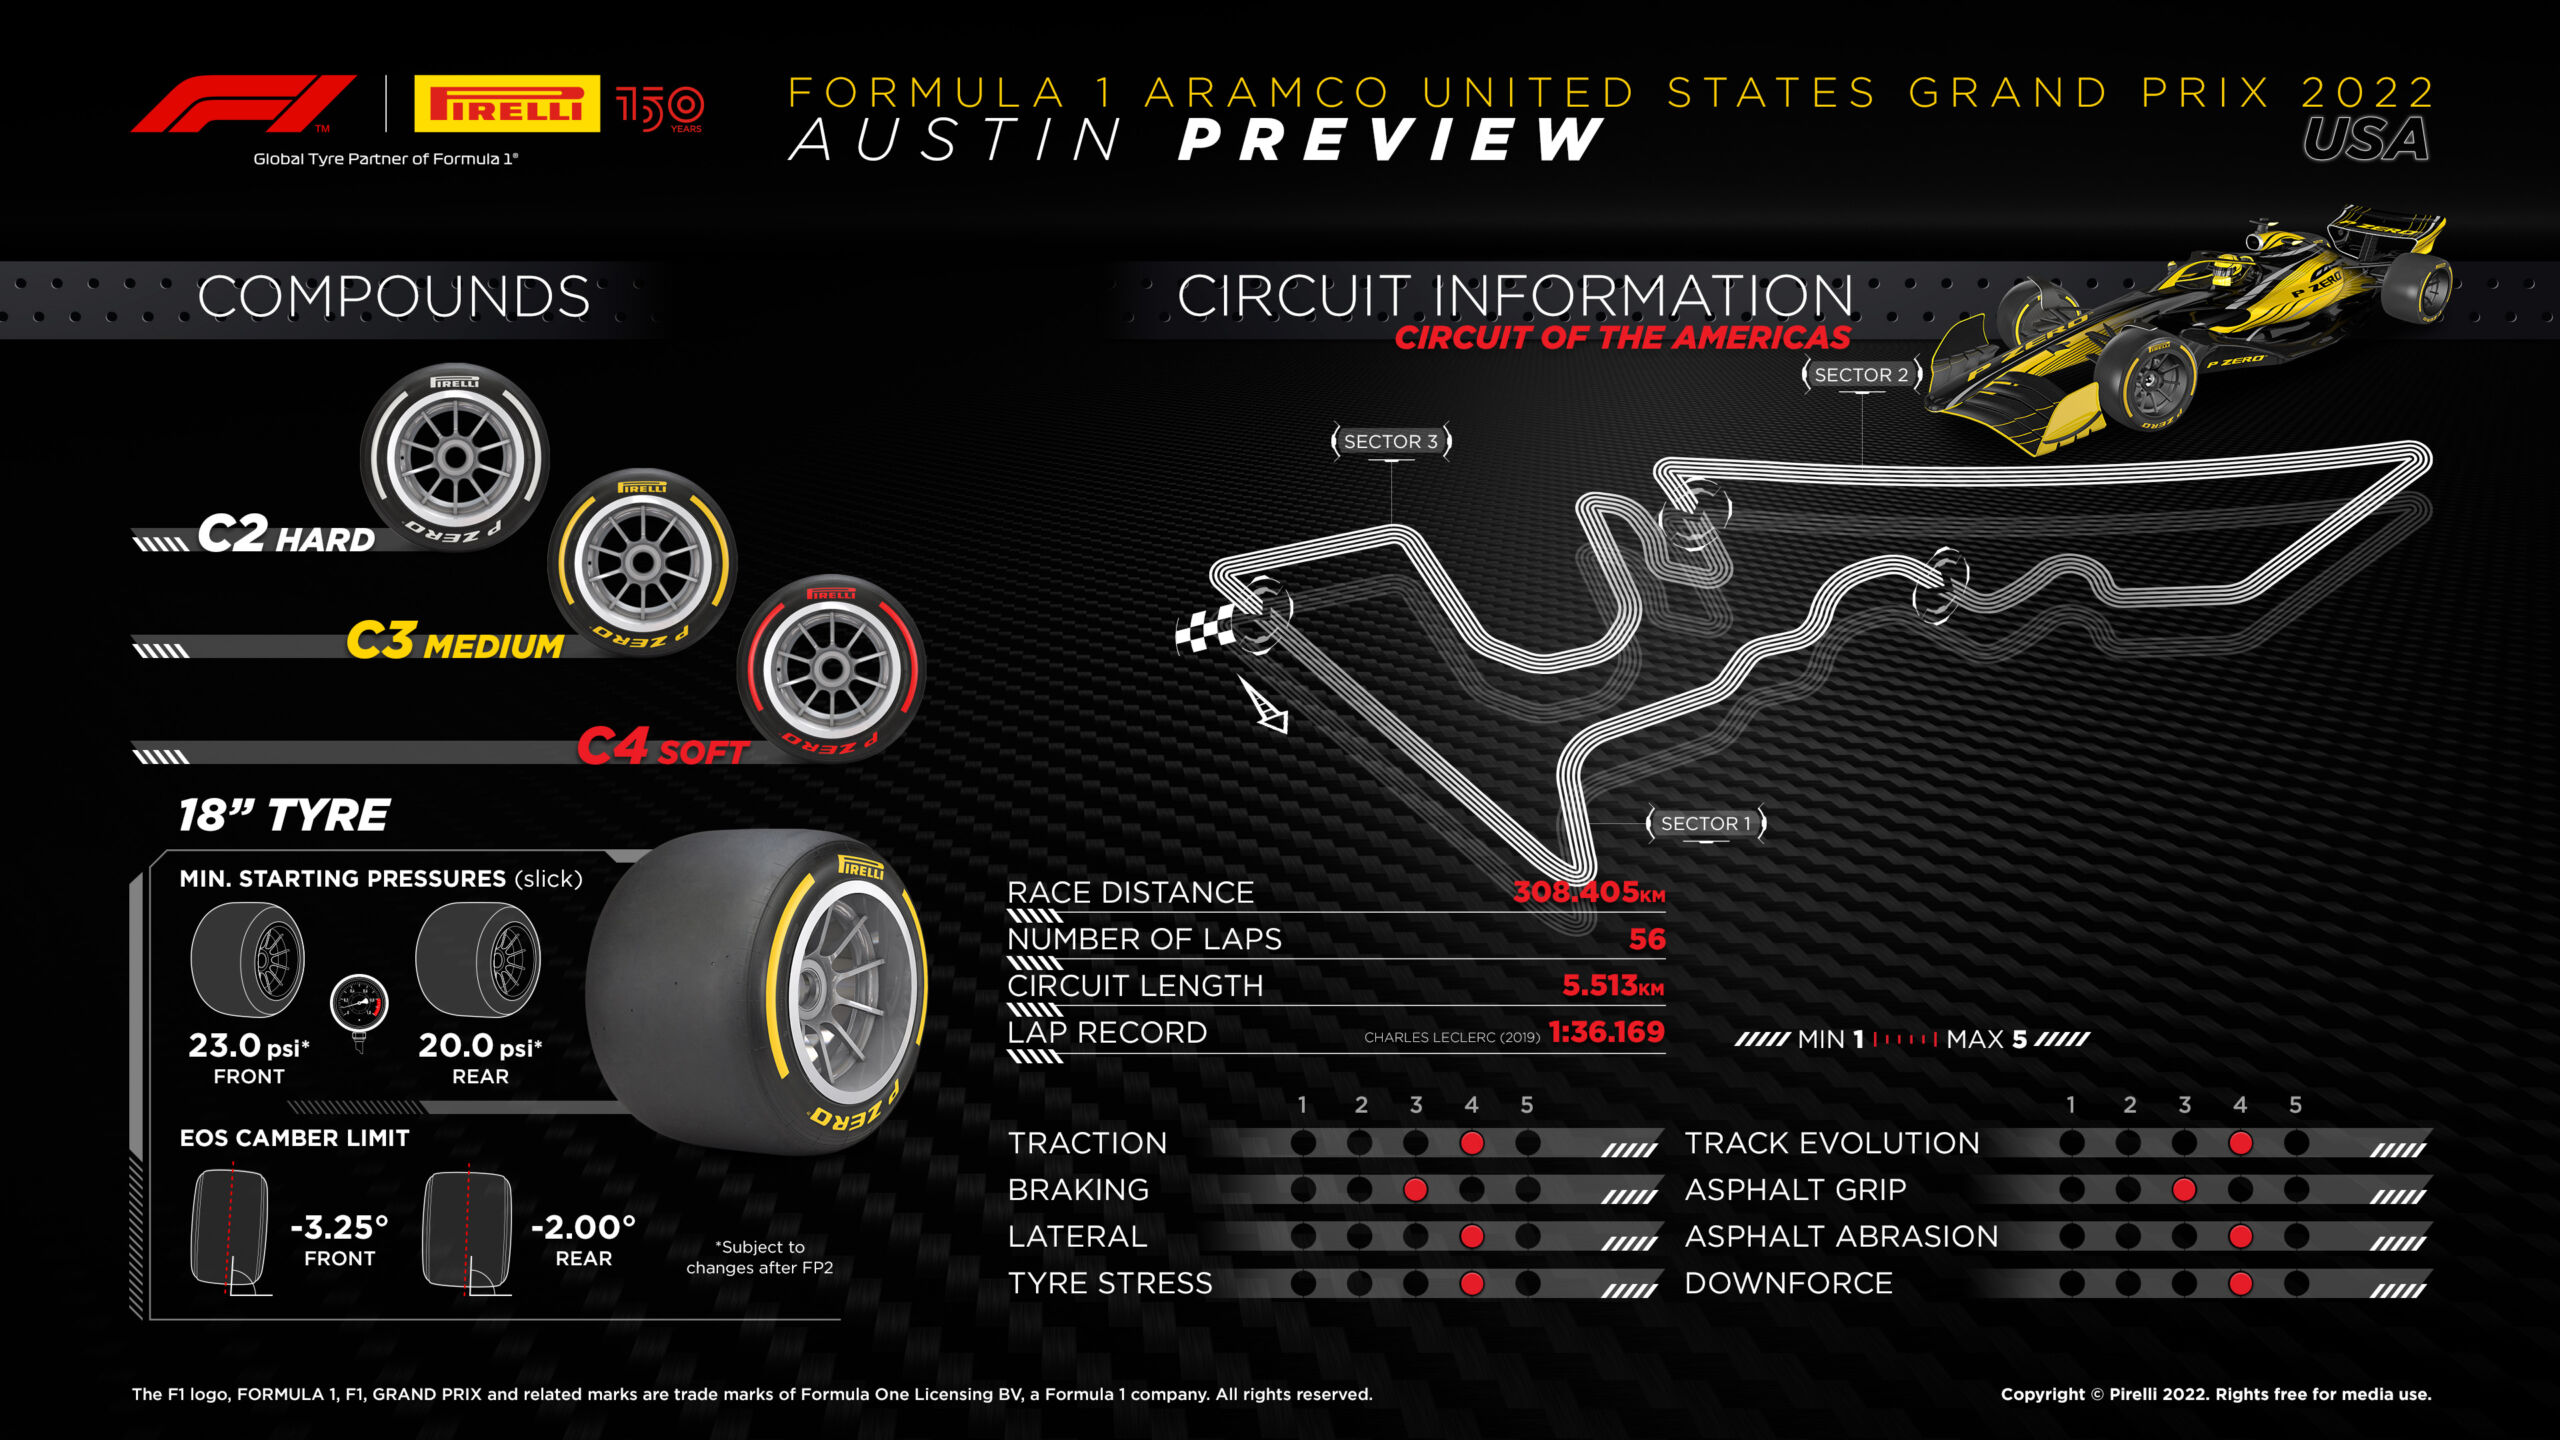 2022 United States Grand Prix Tyre Compounds